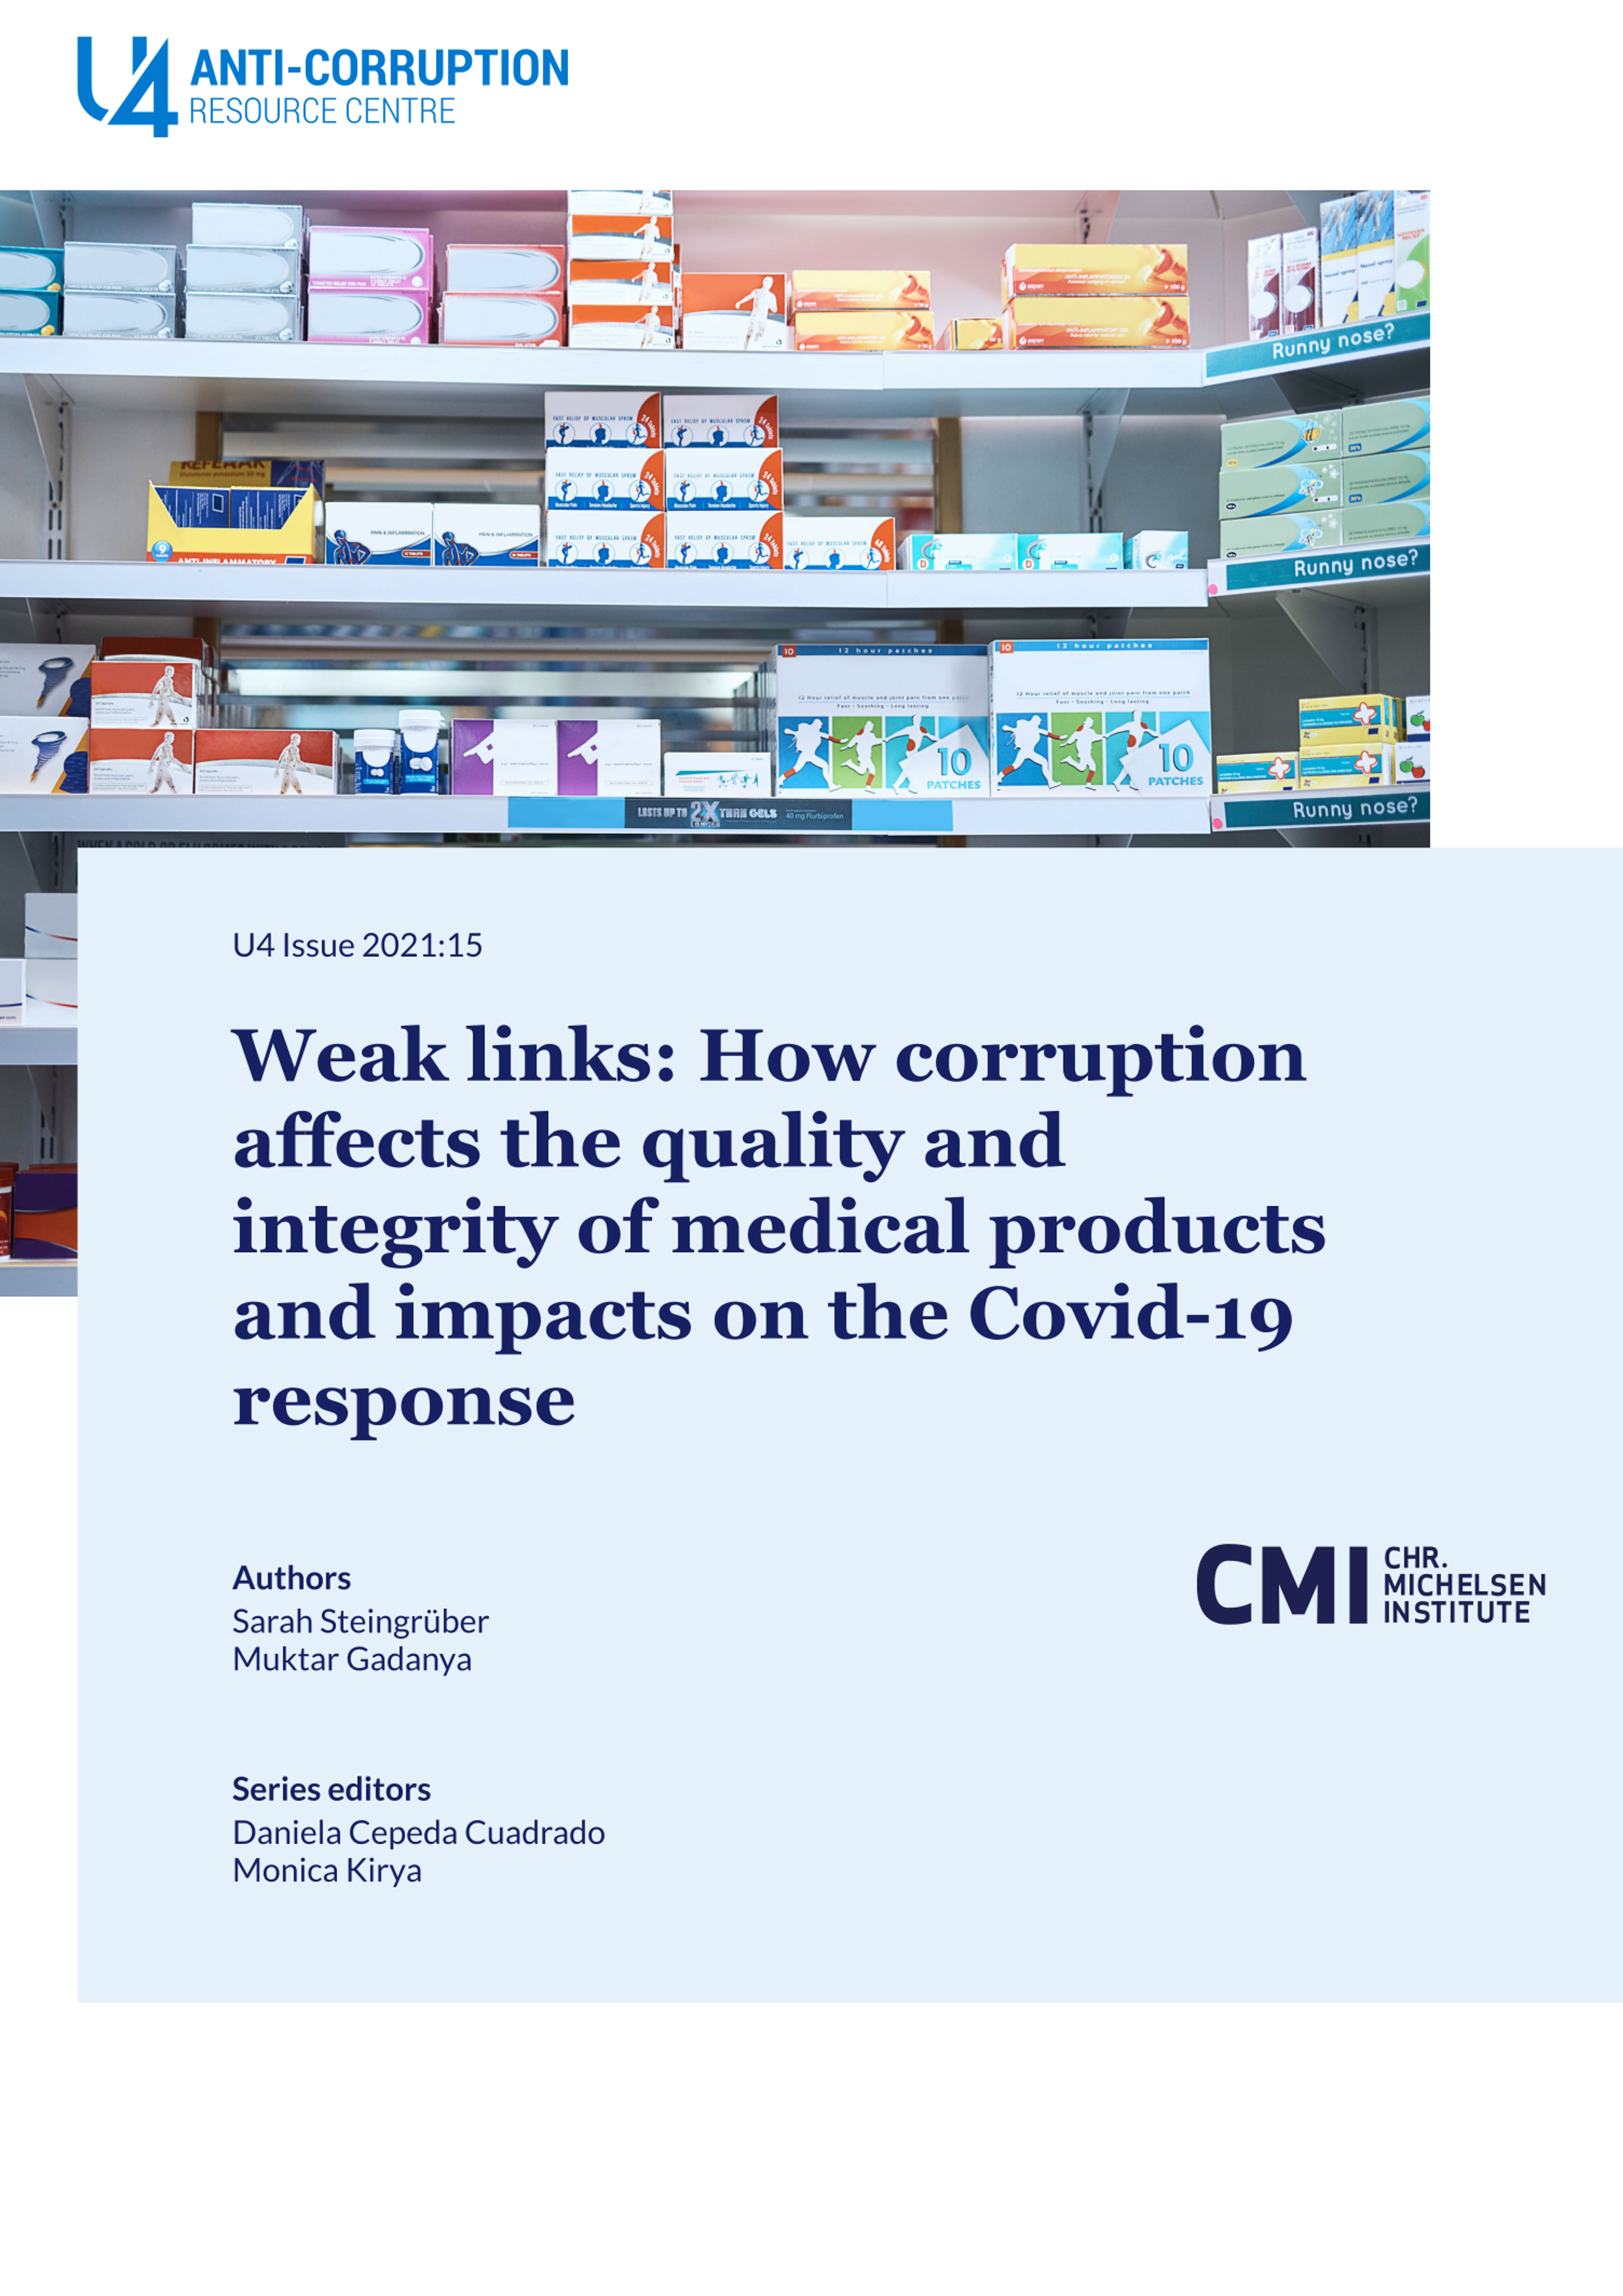 Weak links: How corruption affects the quality and integrity of medical products and impacts on the Covid-19 response